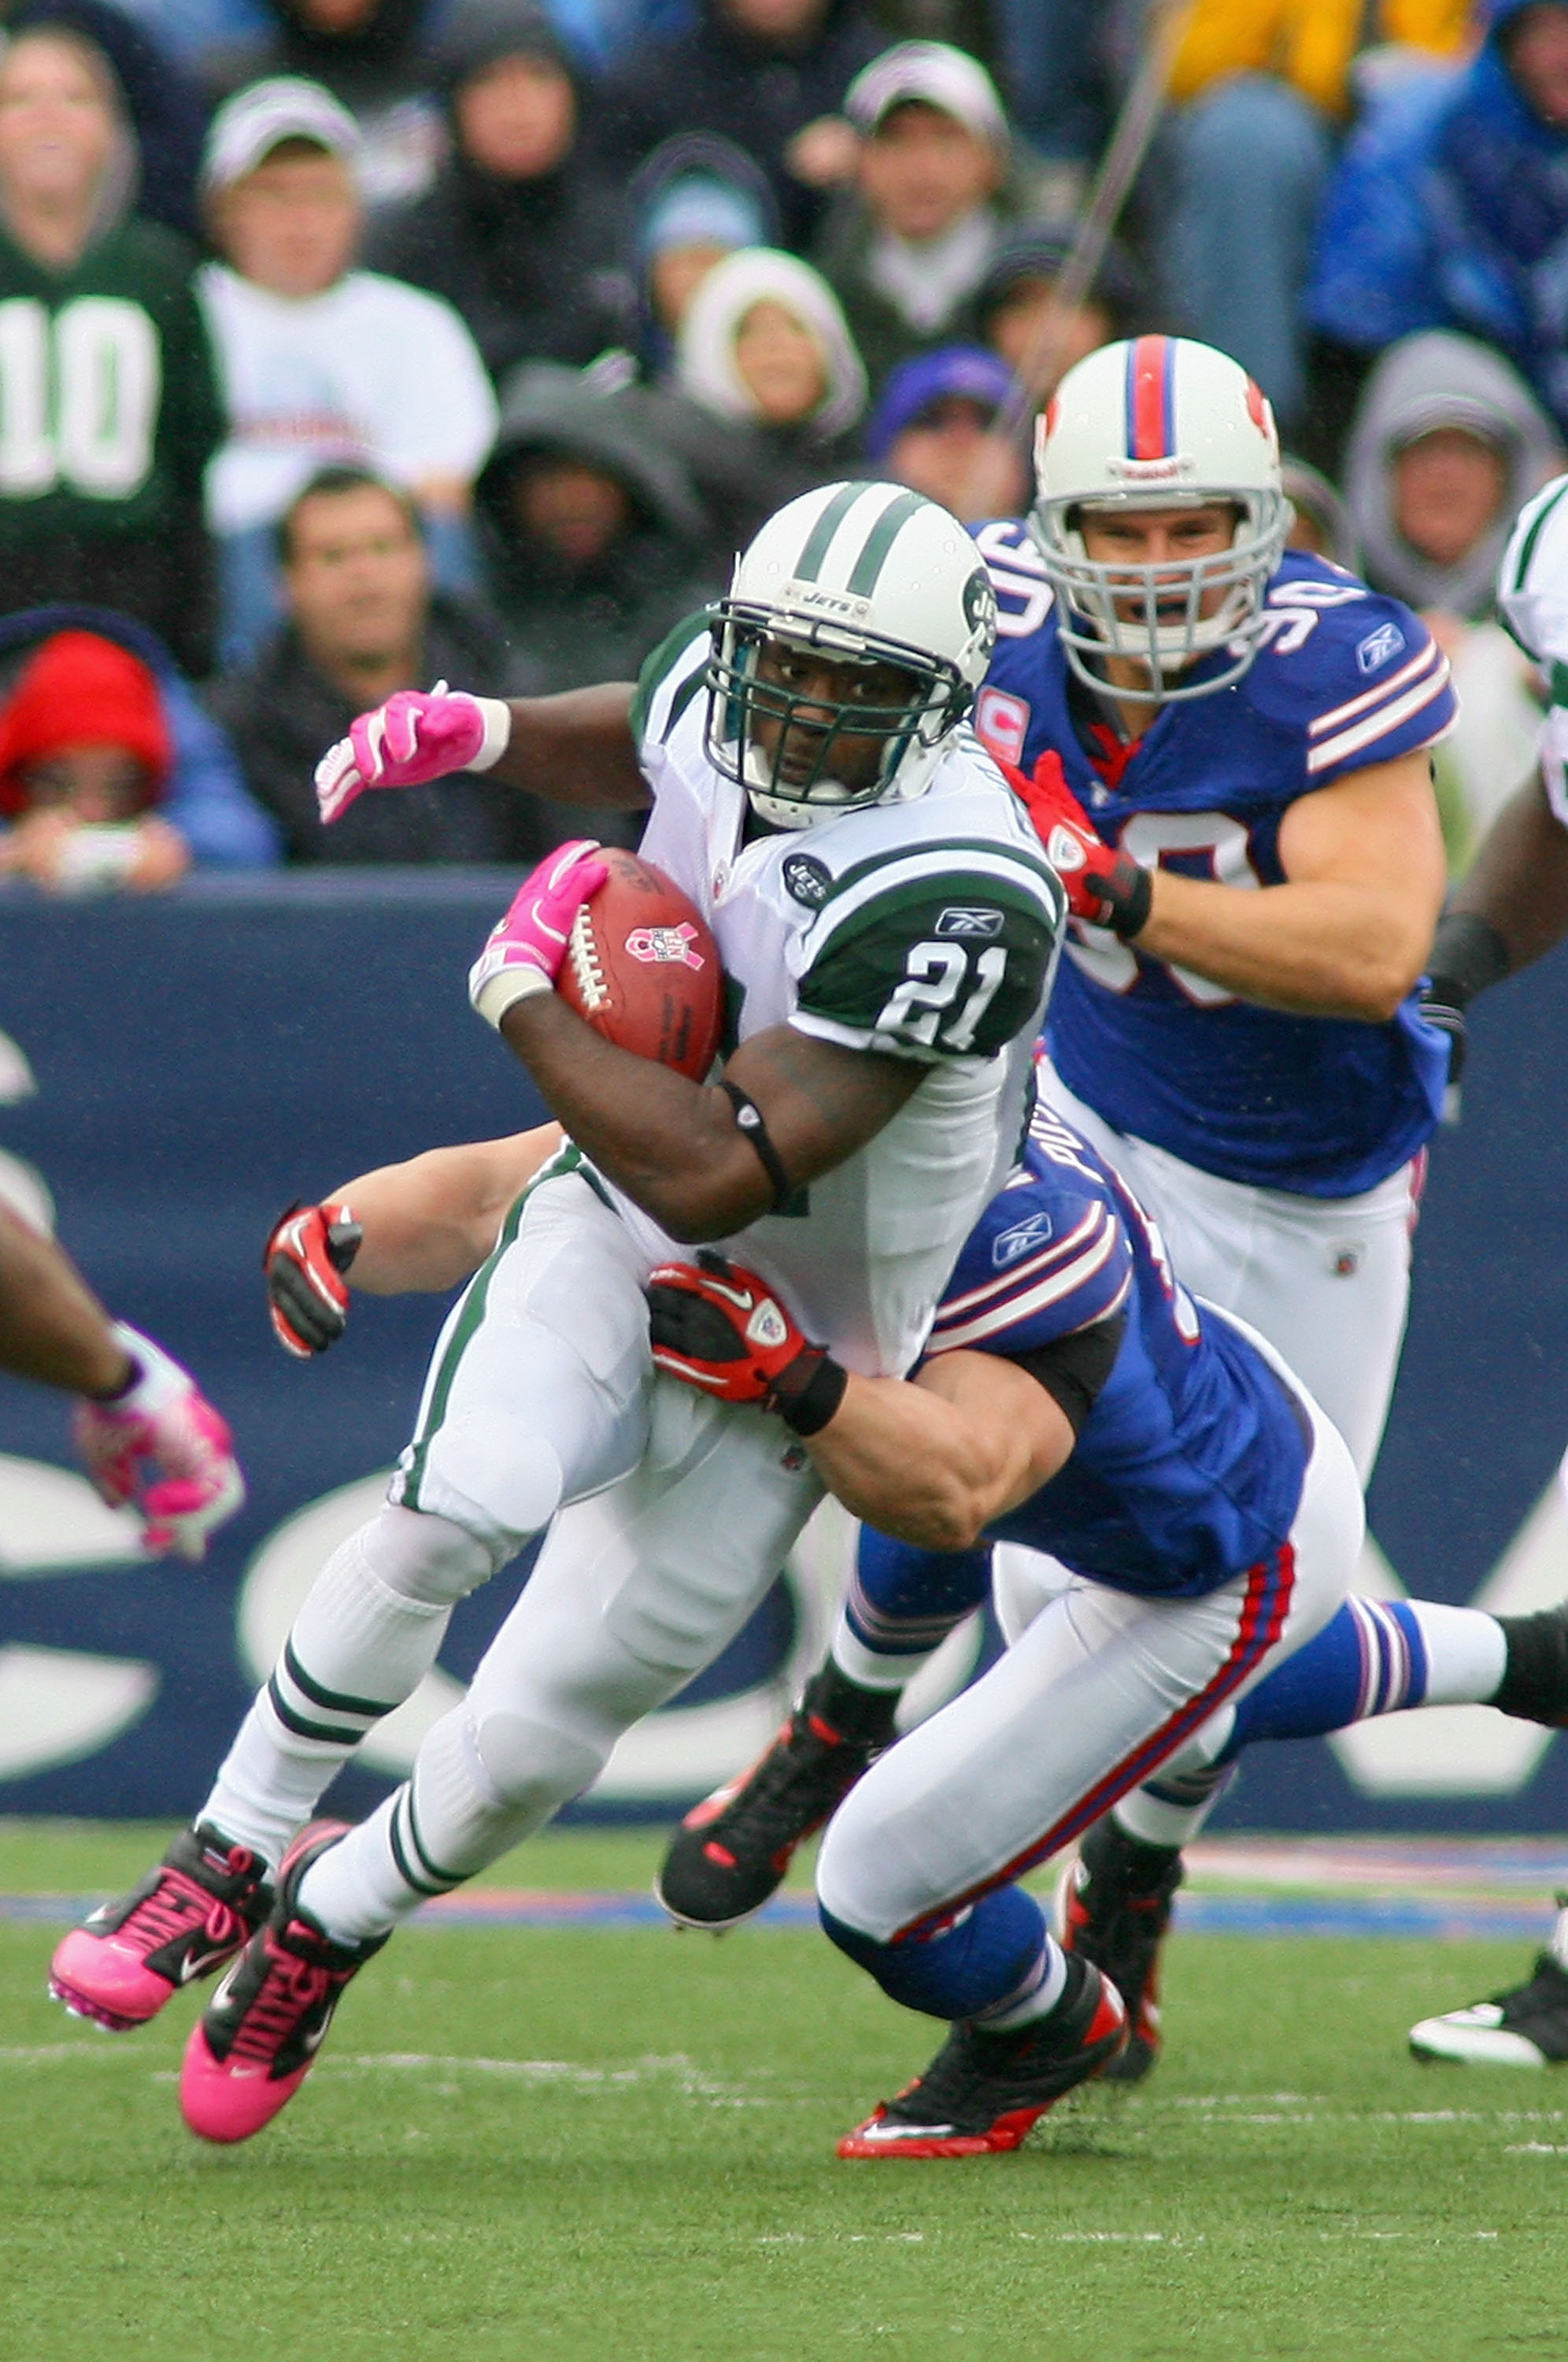 ORCHARD PARK, NY - OCTOBER 03:  LaDainian Tomlinson #21 of the New York Jets runs against the Buffalo Bills at Ralph Wilson Stadium on October 3, 2010 in Orchard Park, New York.  (Photo by Rick Stewart/Getty Images)